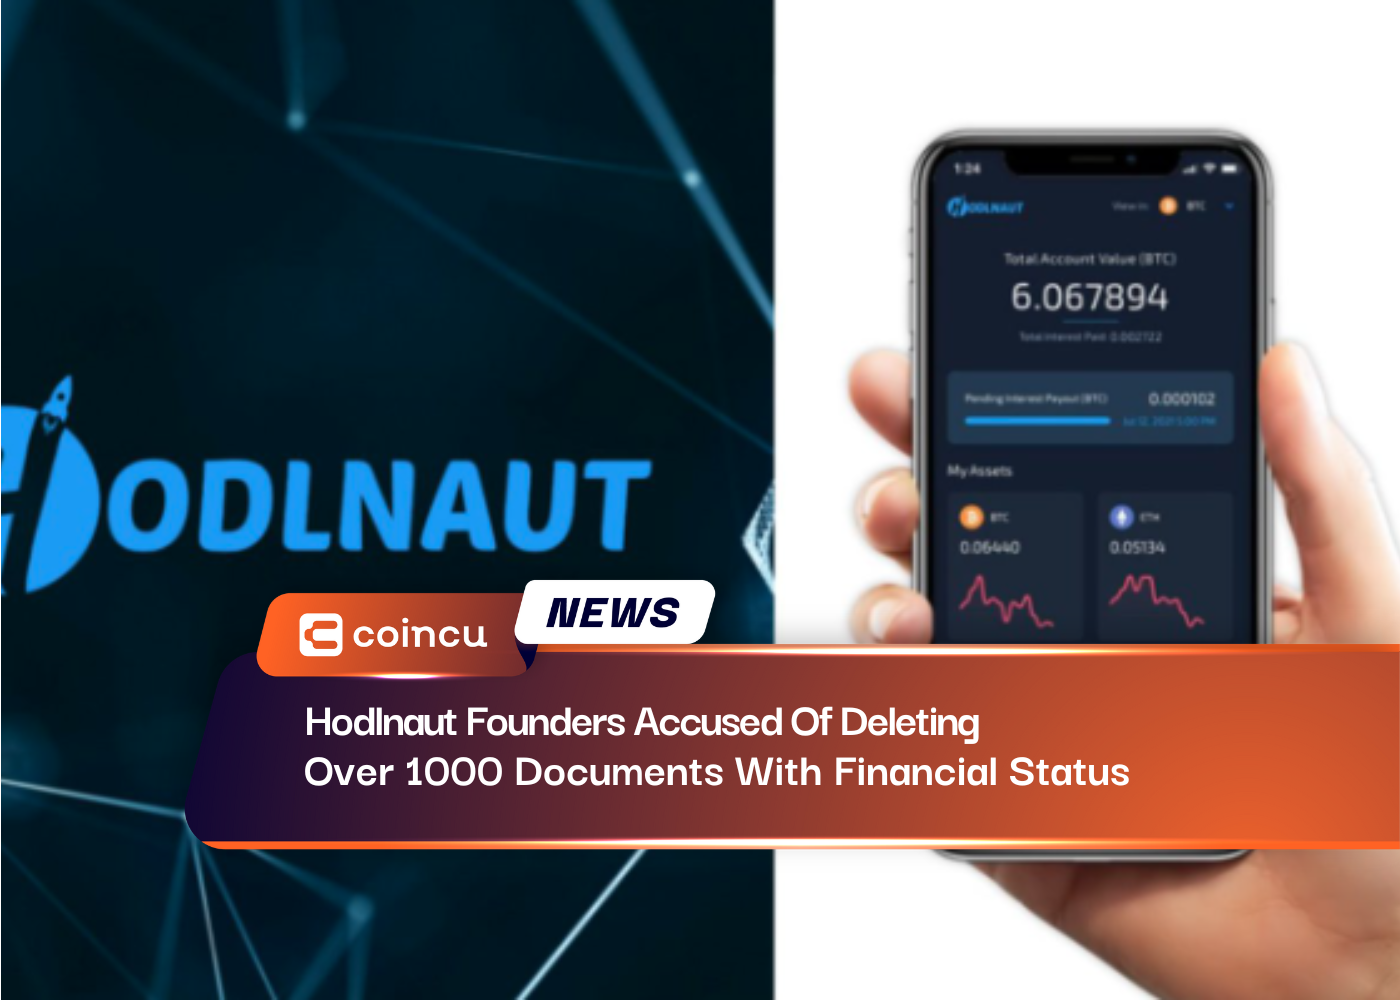 Hodlnaut Founders Accused Of Deleting Over 1000 Documents With Financial Status